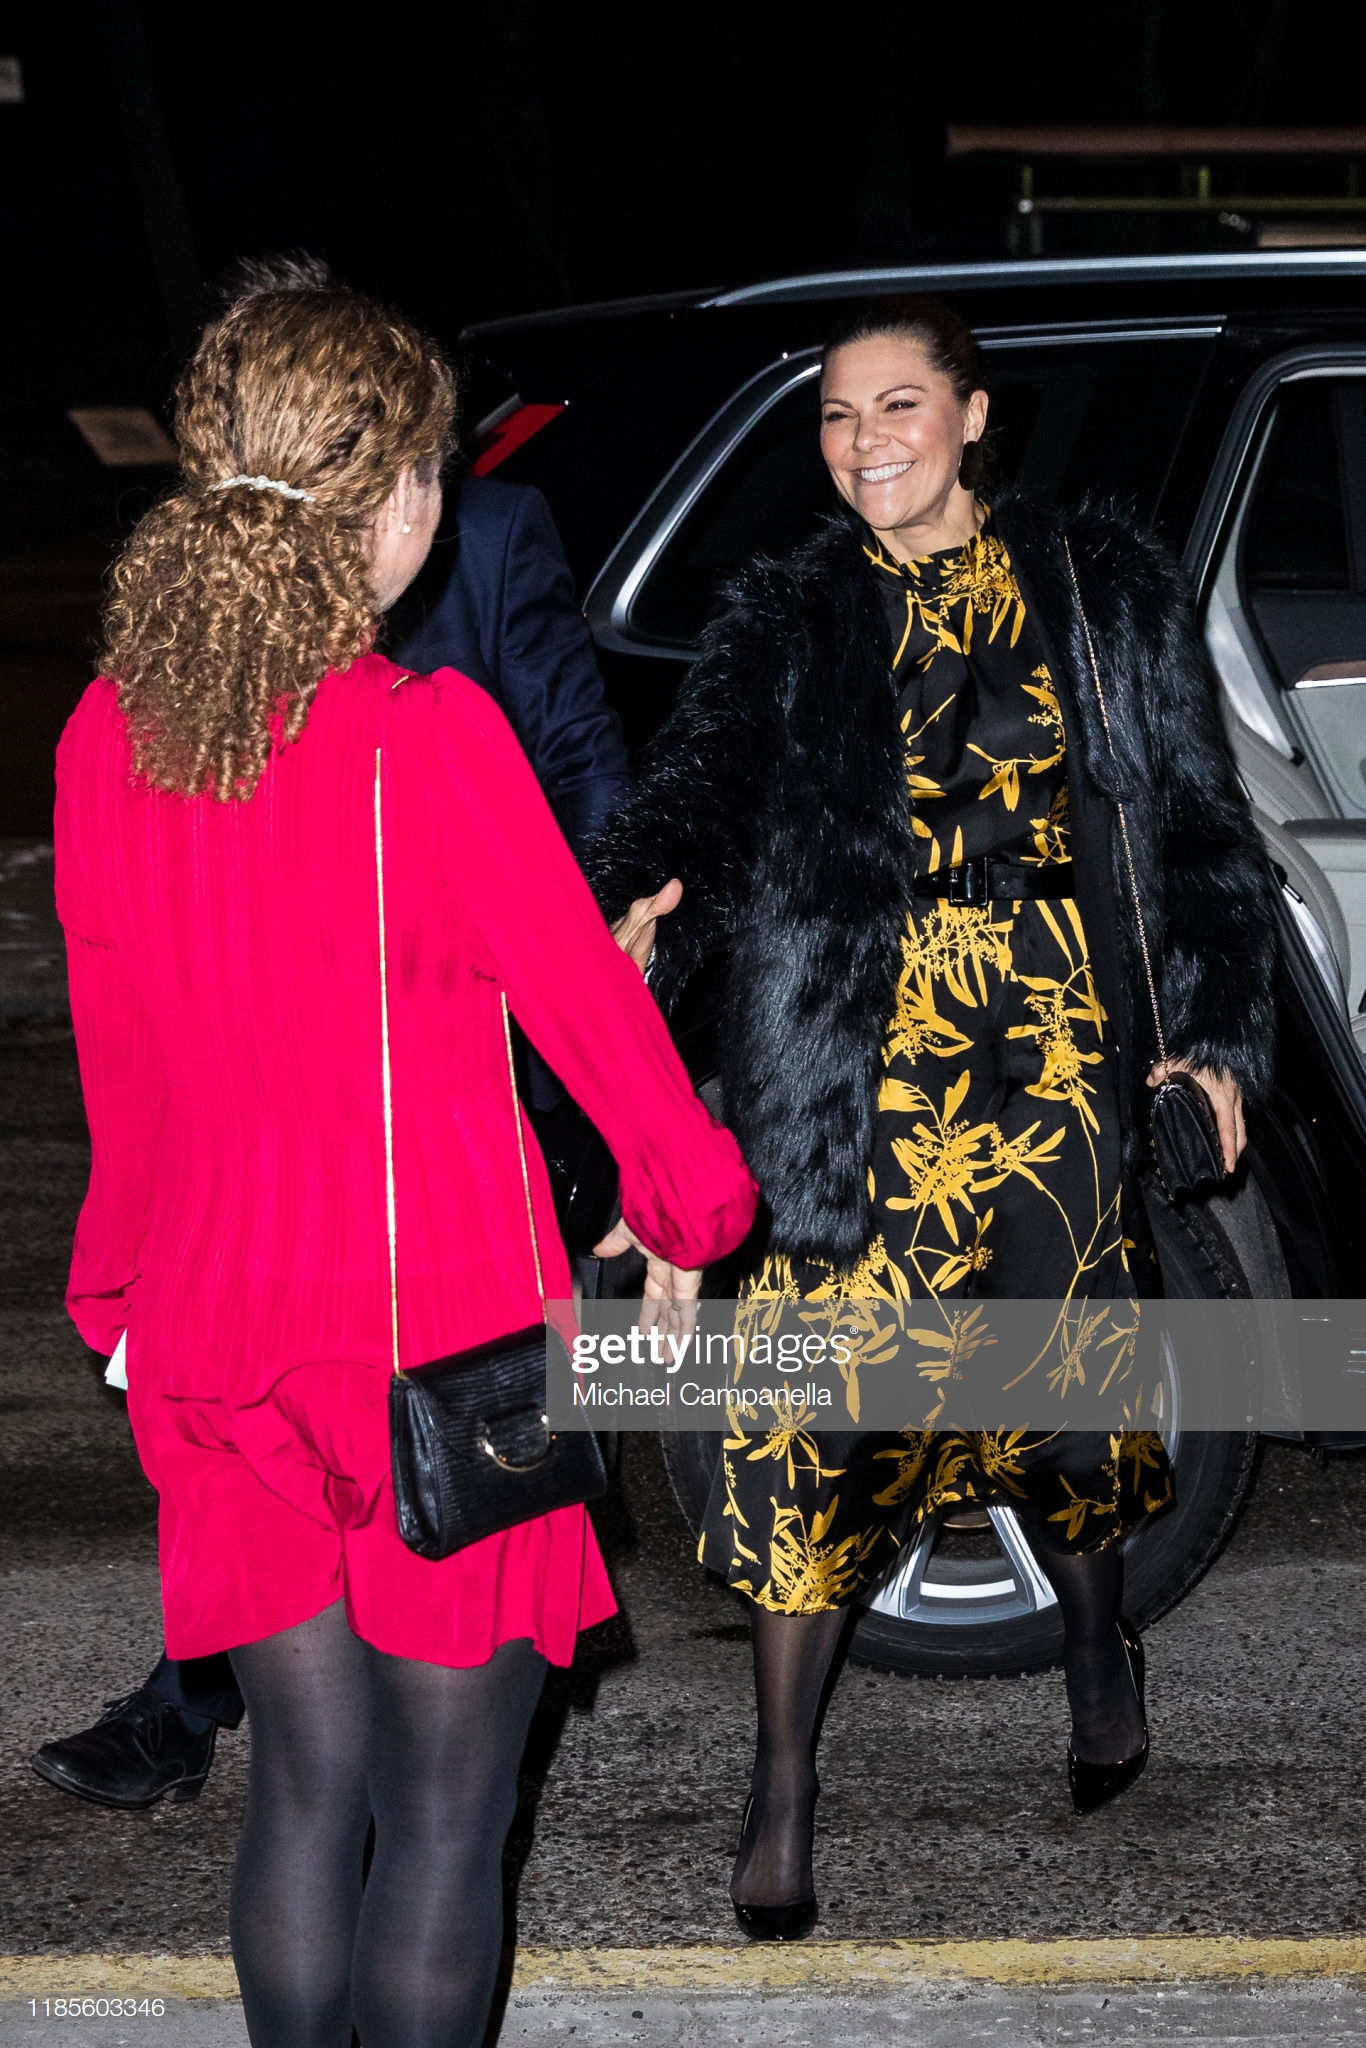 STOCKHOLM, SWEDEN - NOVEMBER 30: Crown Princess Victoria of Sweden (right) arrives at Berwaldhallen to attend a concert in celebration of Berwaldhallens 40th anniversary on November 30, 2019 in Stockholm, Sweden. (Photo by Michael Campanella/Getty Images)